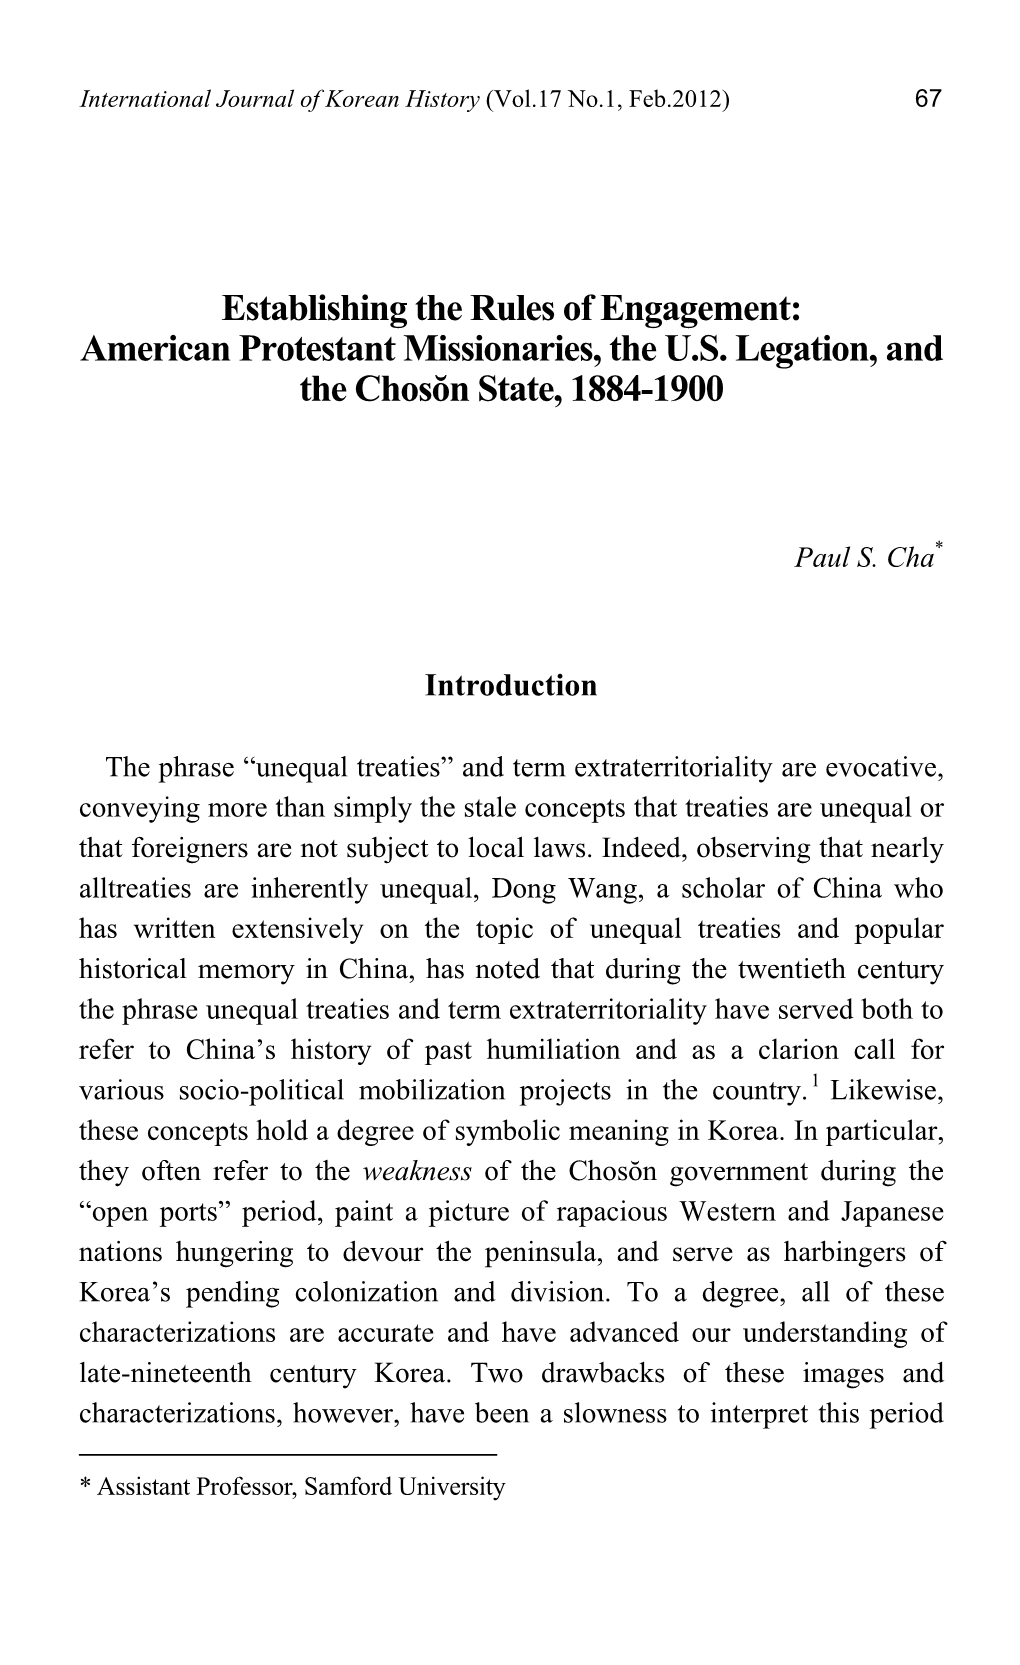 American Protestant Missionaries, the US Legation, and the Chosŏn State